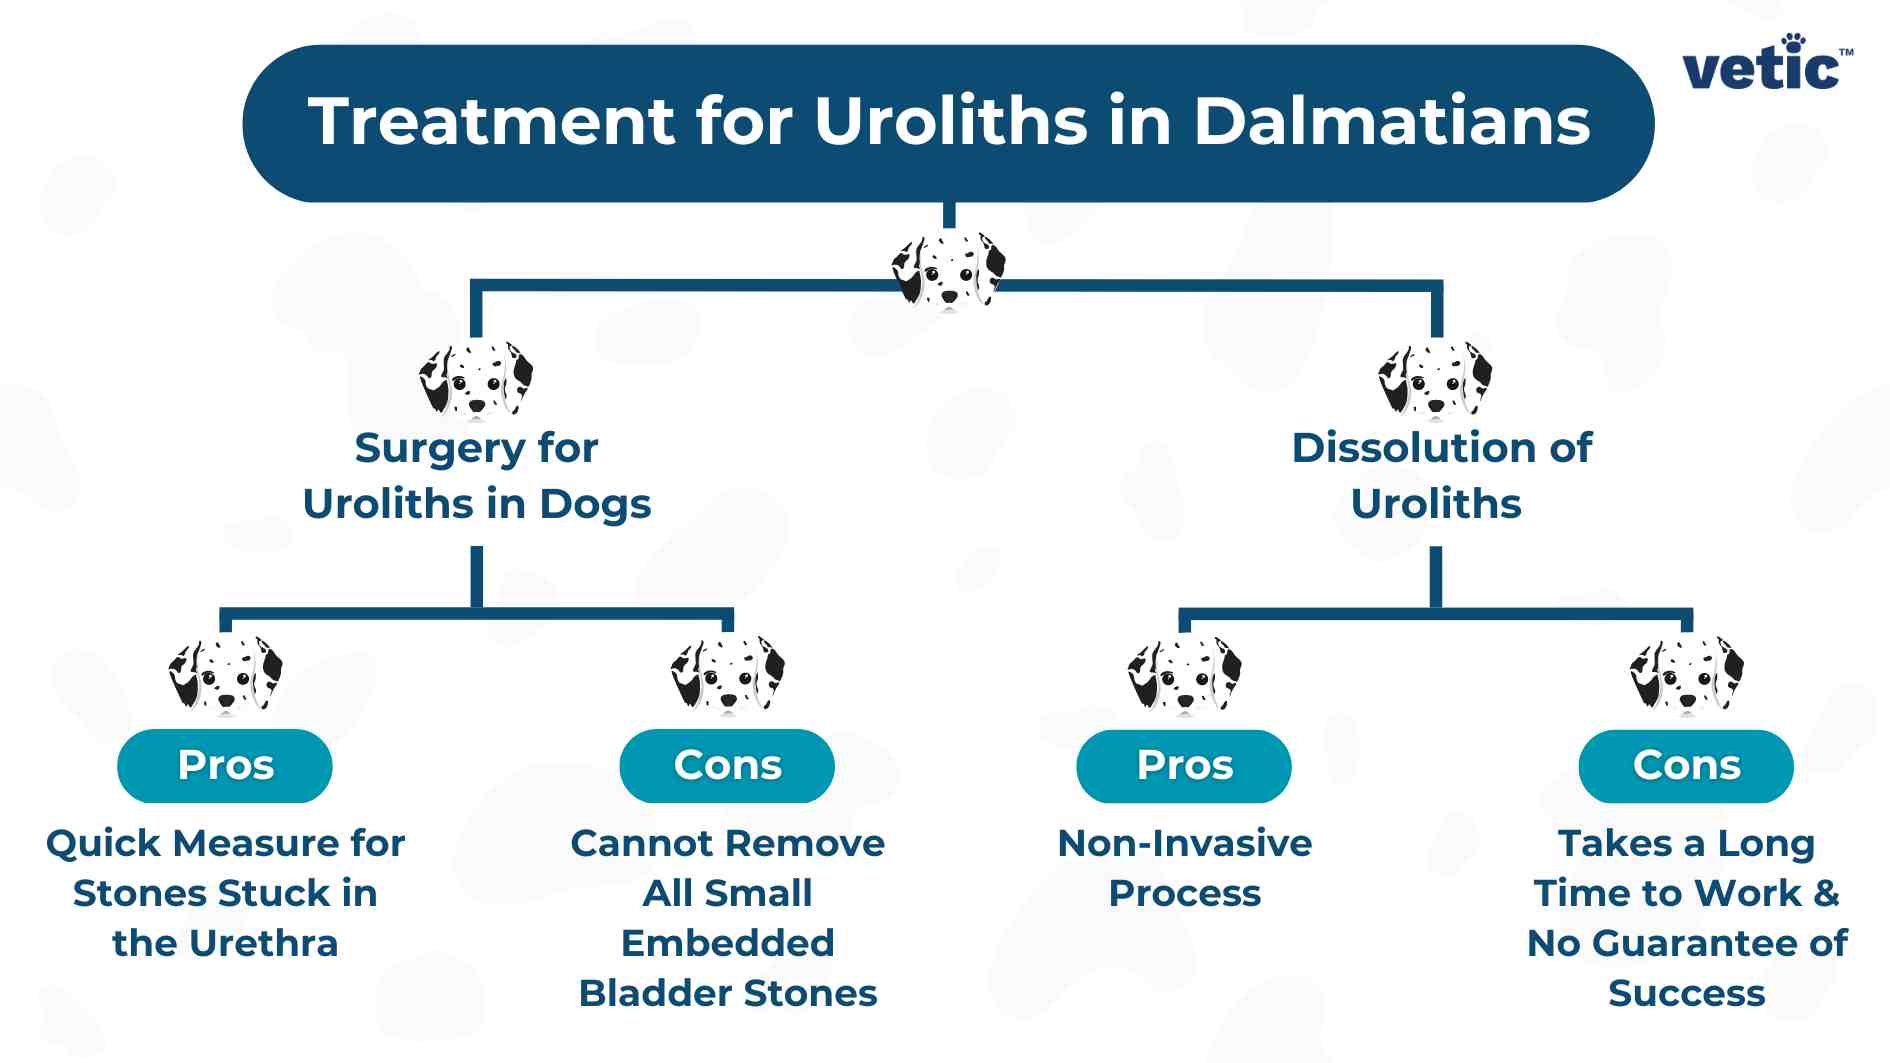 The image is an infographic that outlines two methods of treating uroliths in Dalmatians - surgery and dissolution. It compares the pros and cons of each method, indicating that surgery is a quick measure but cannot remove all small embedded bladder stones, while dissolution is non-invasive but takes a long time with no guaranteed success.